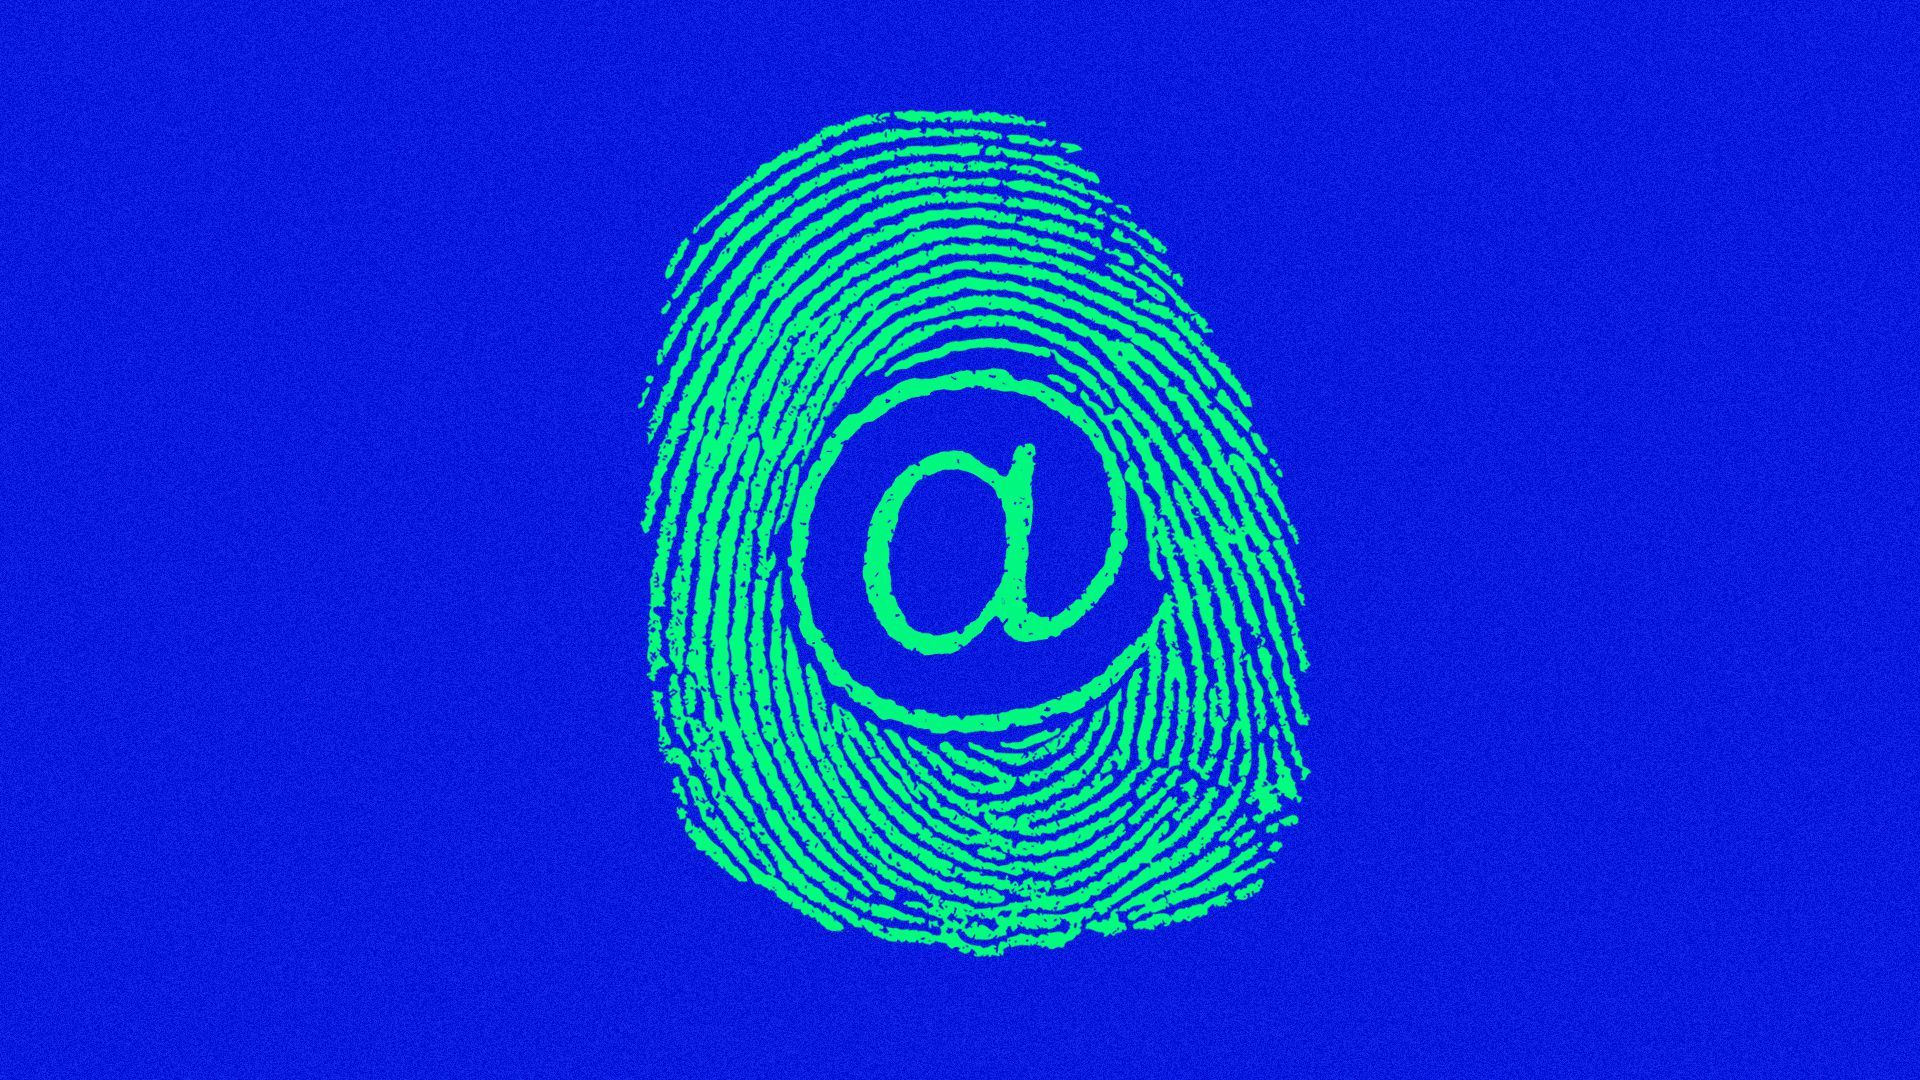 Illustration of a fingerprint with an @ symbol in the center